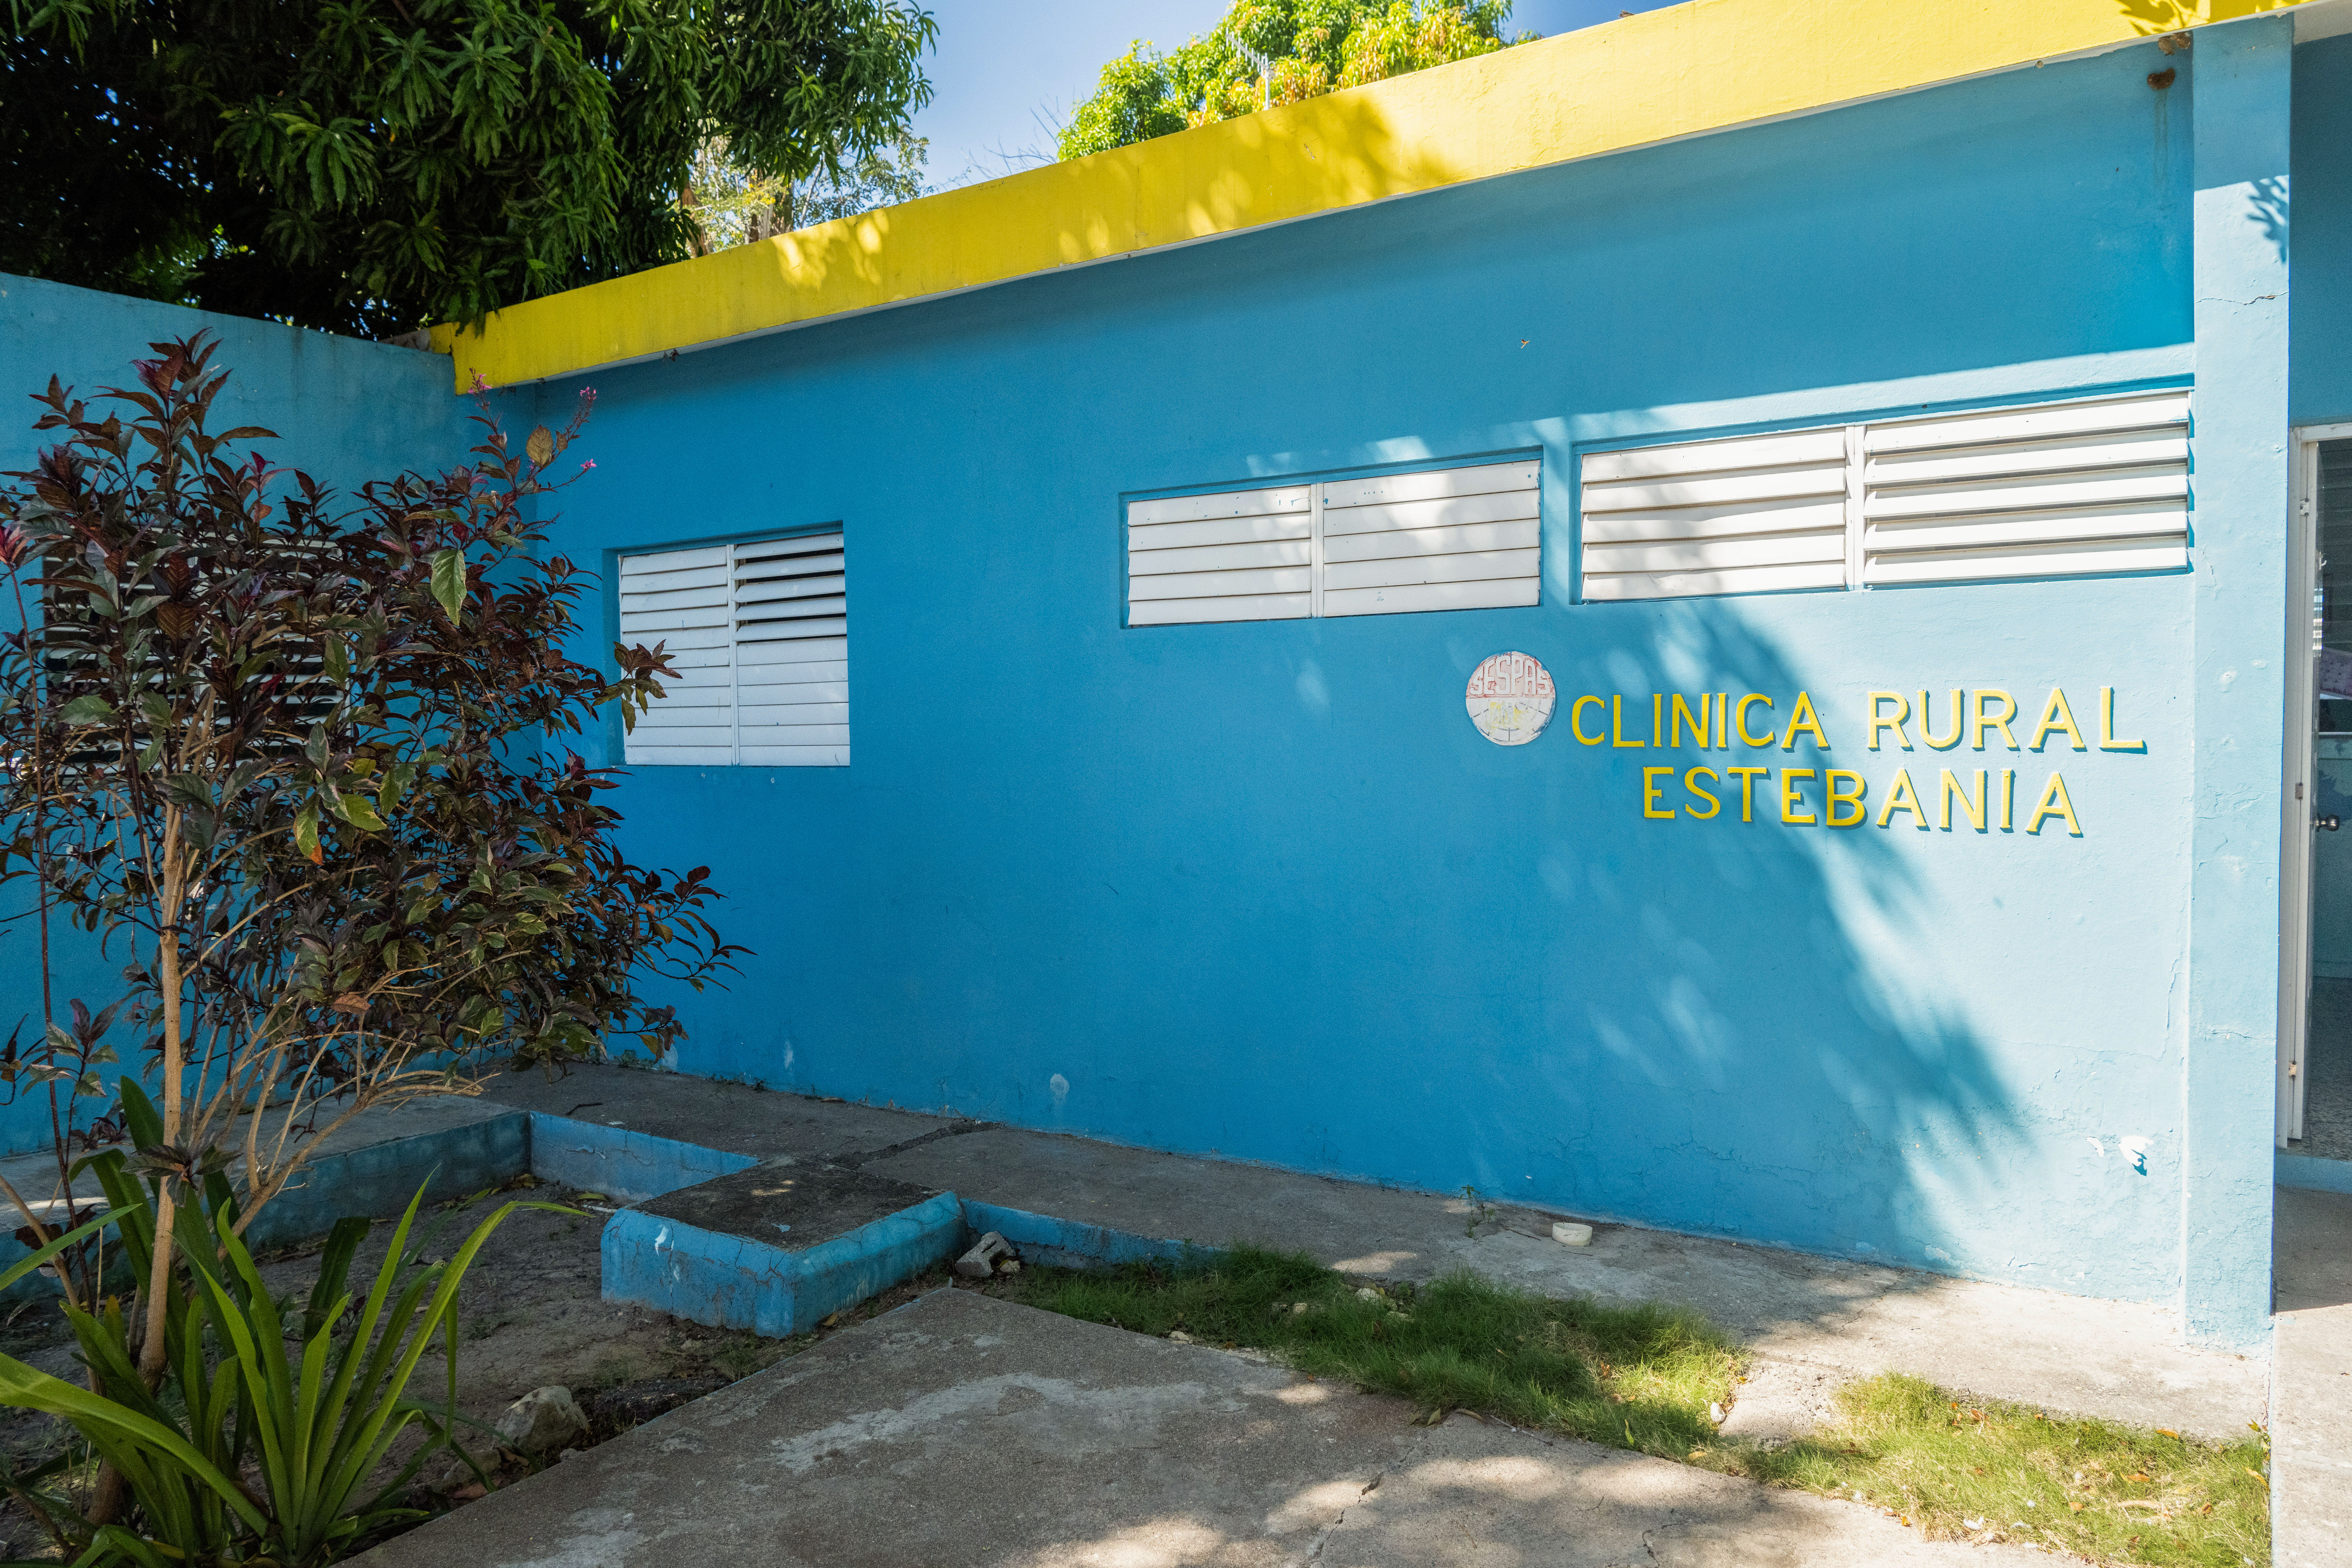 Light blue building that says Clinica Rural Estebania in yellow 